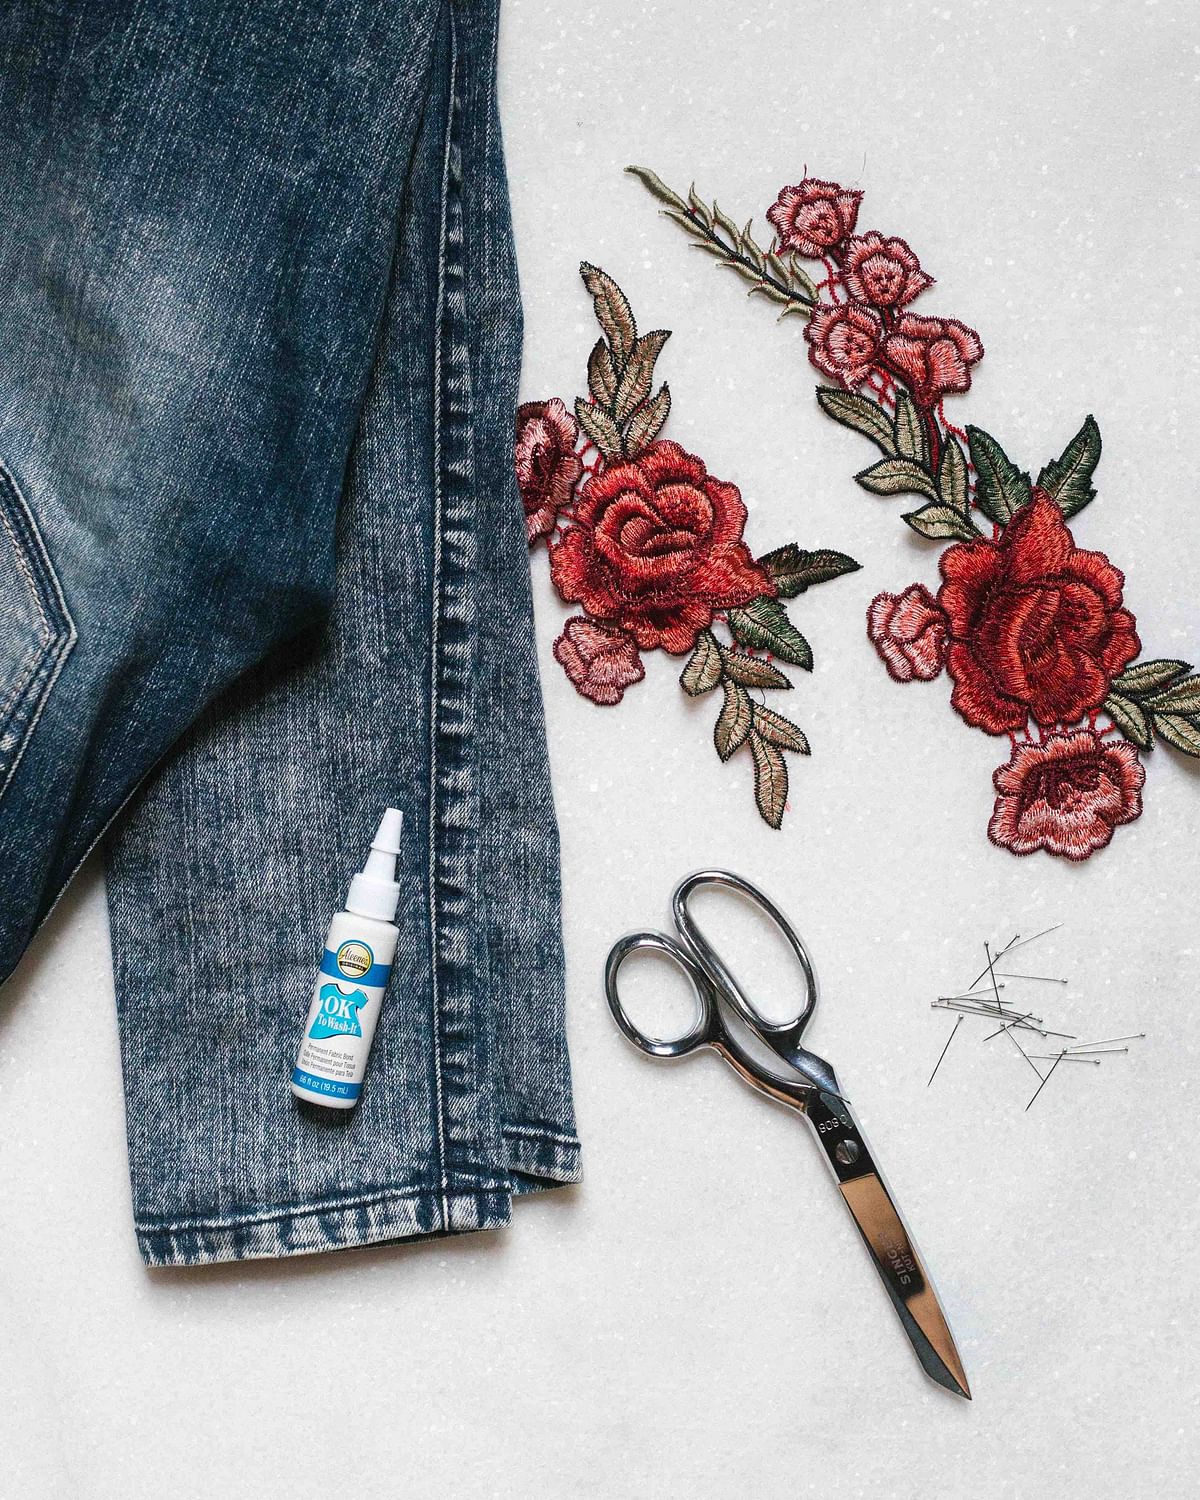 10 trendy ways to upcycle your jeans